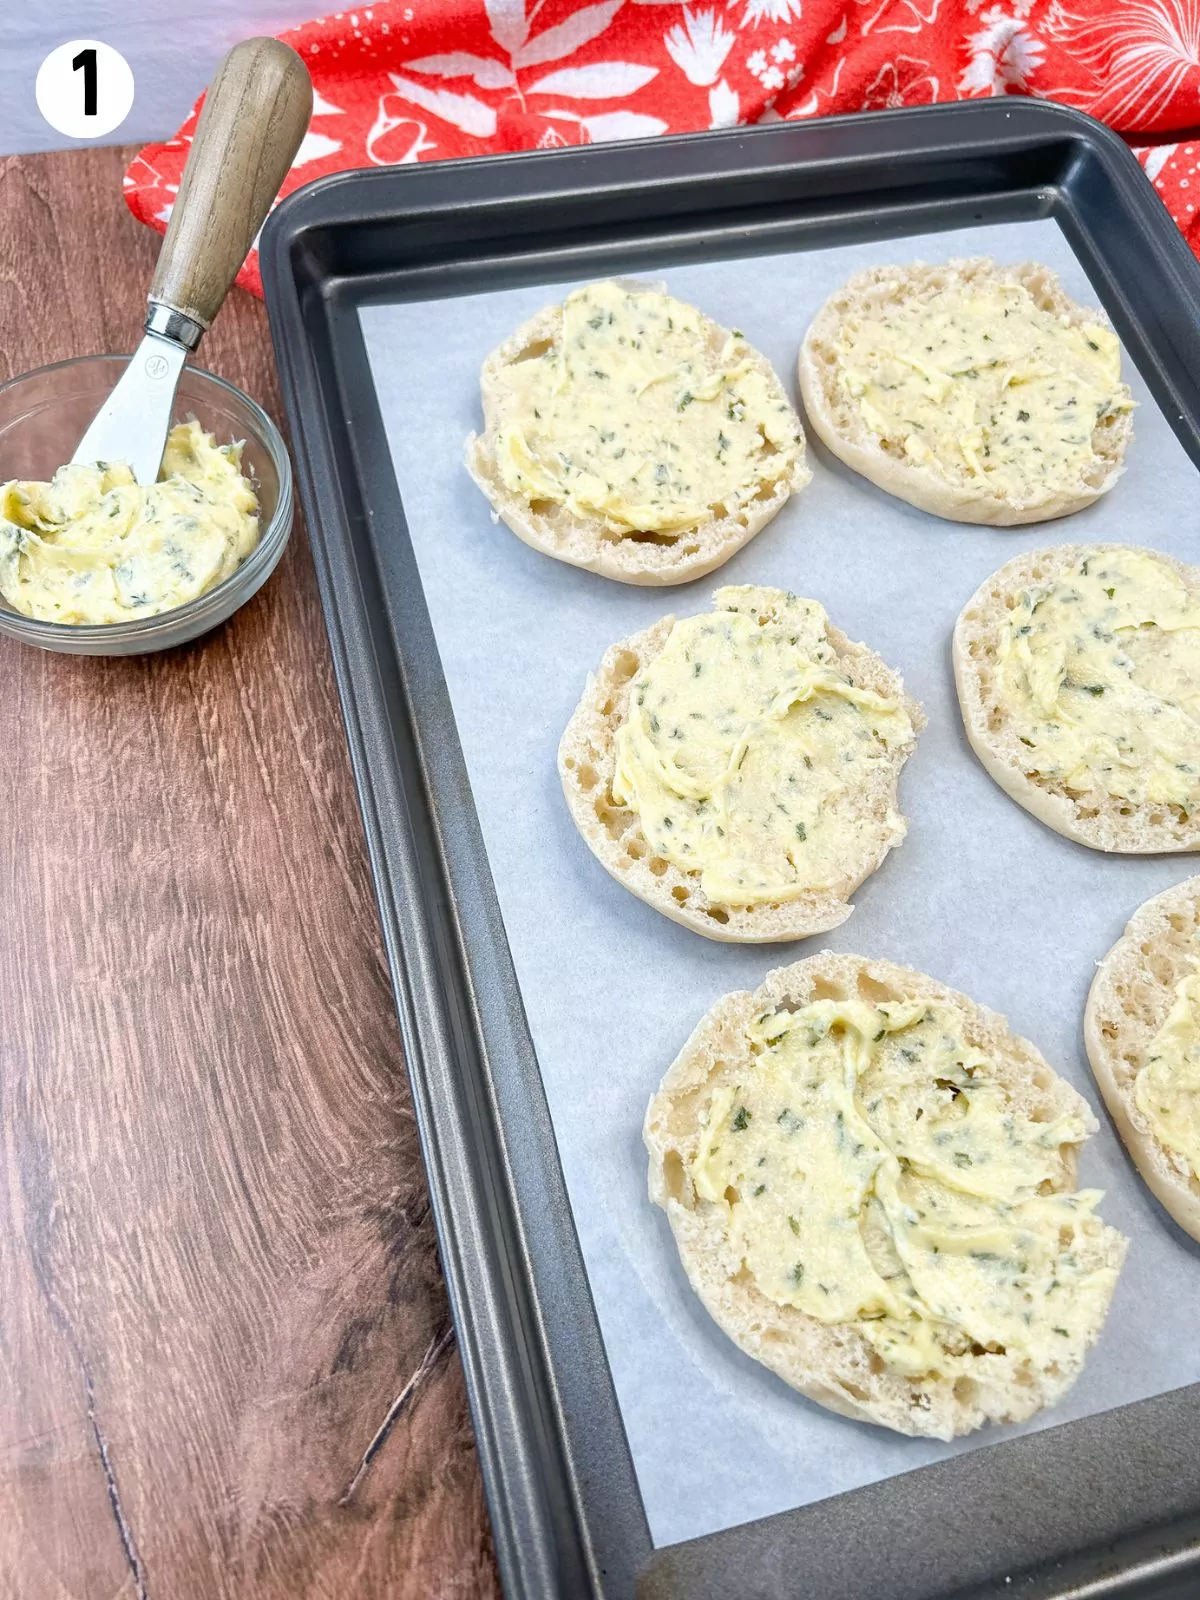 English muffins with garlic butter in small bowl.